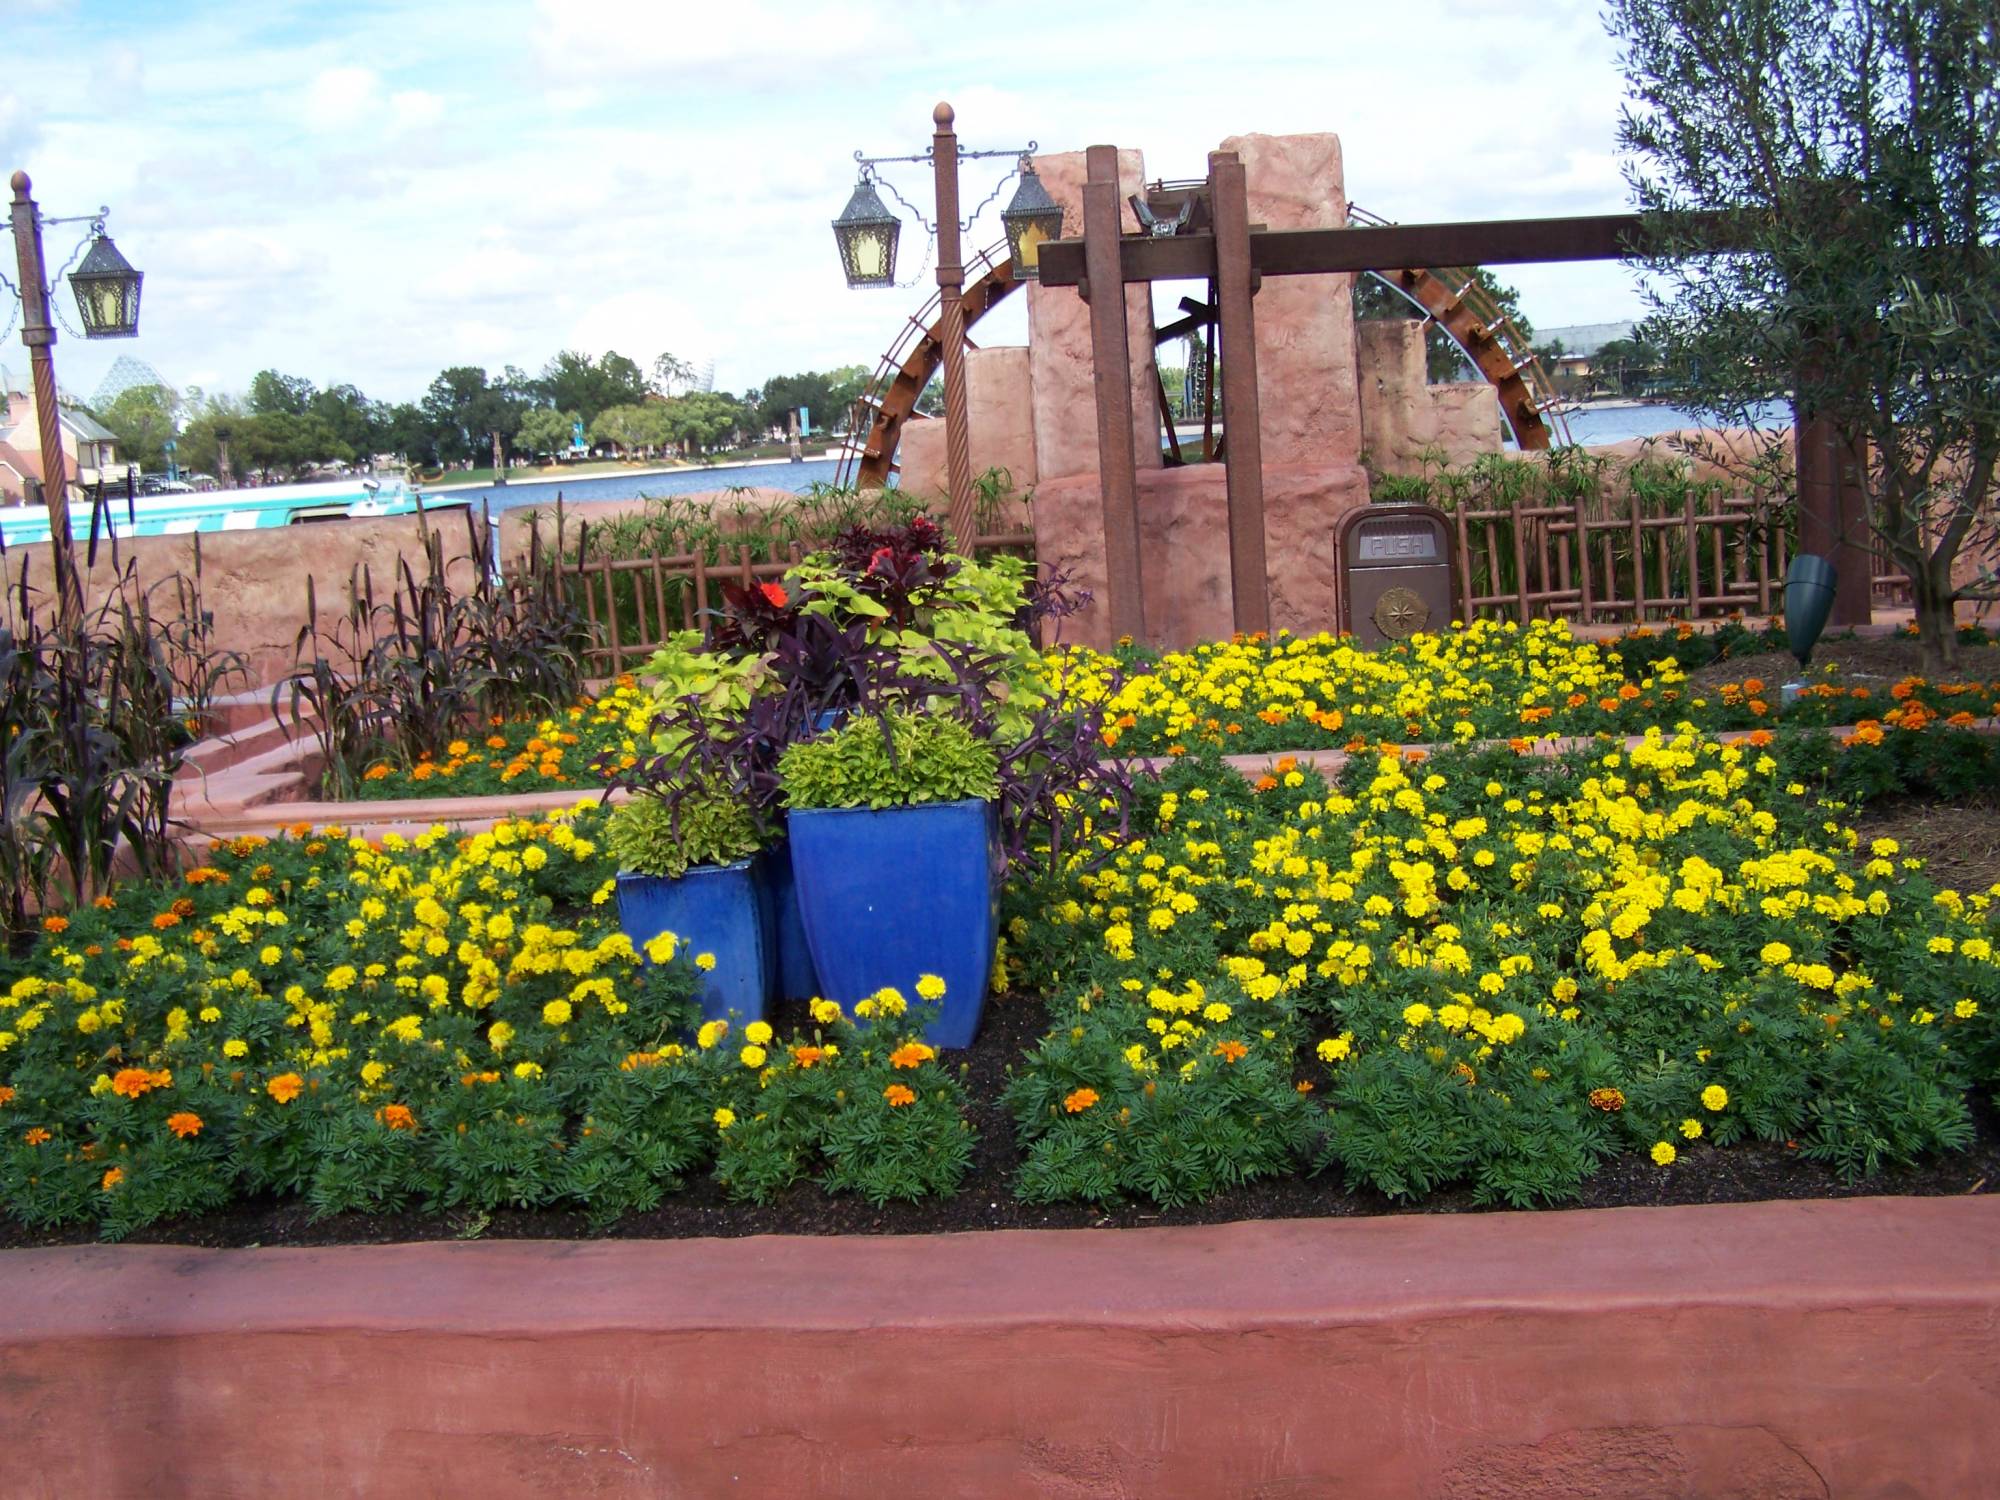 Flowers in Morocco in World Showcase at Epcot